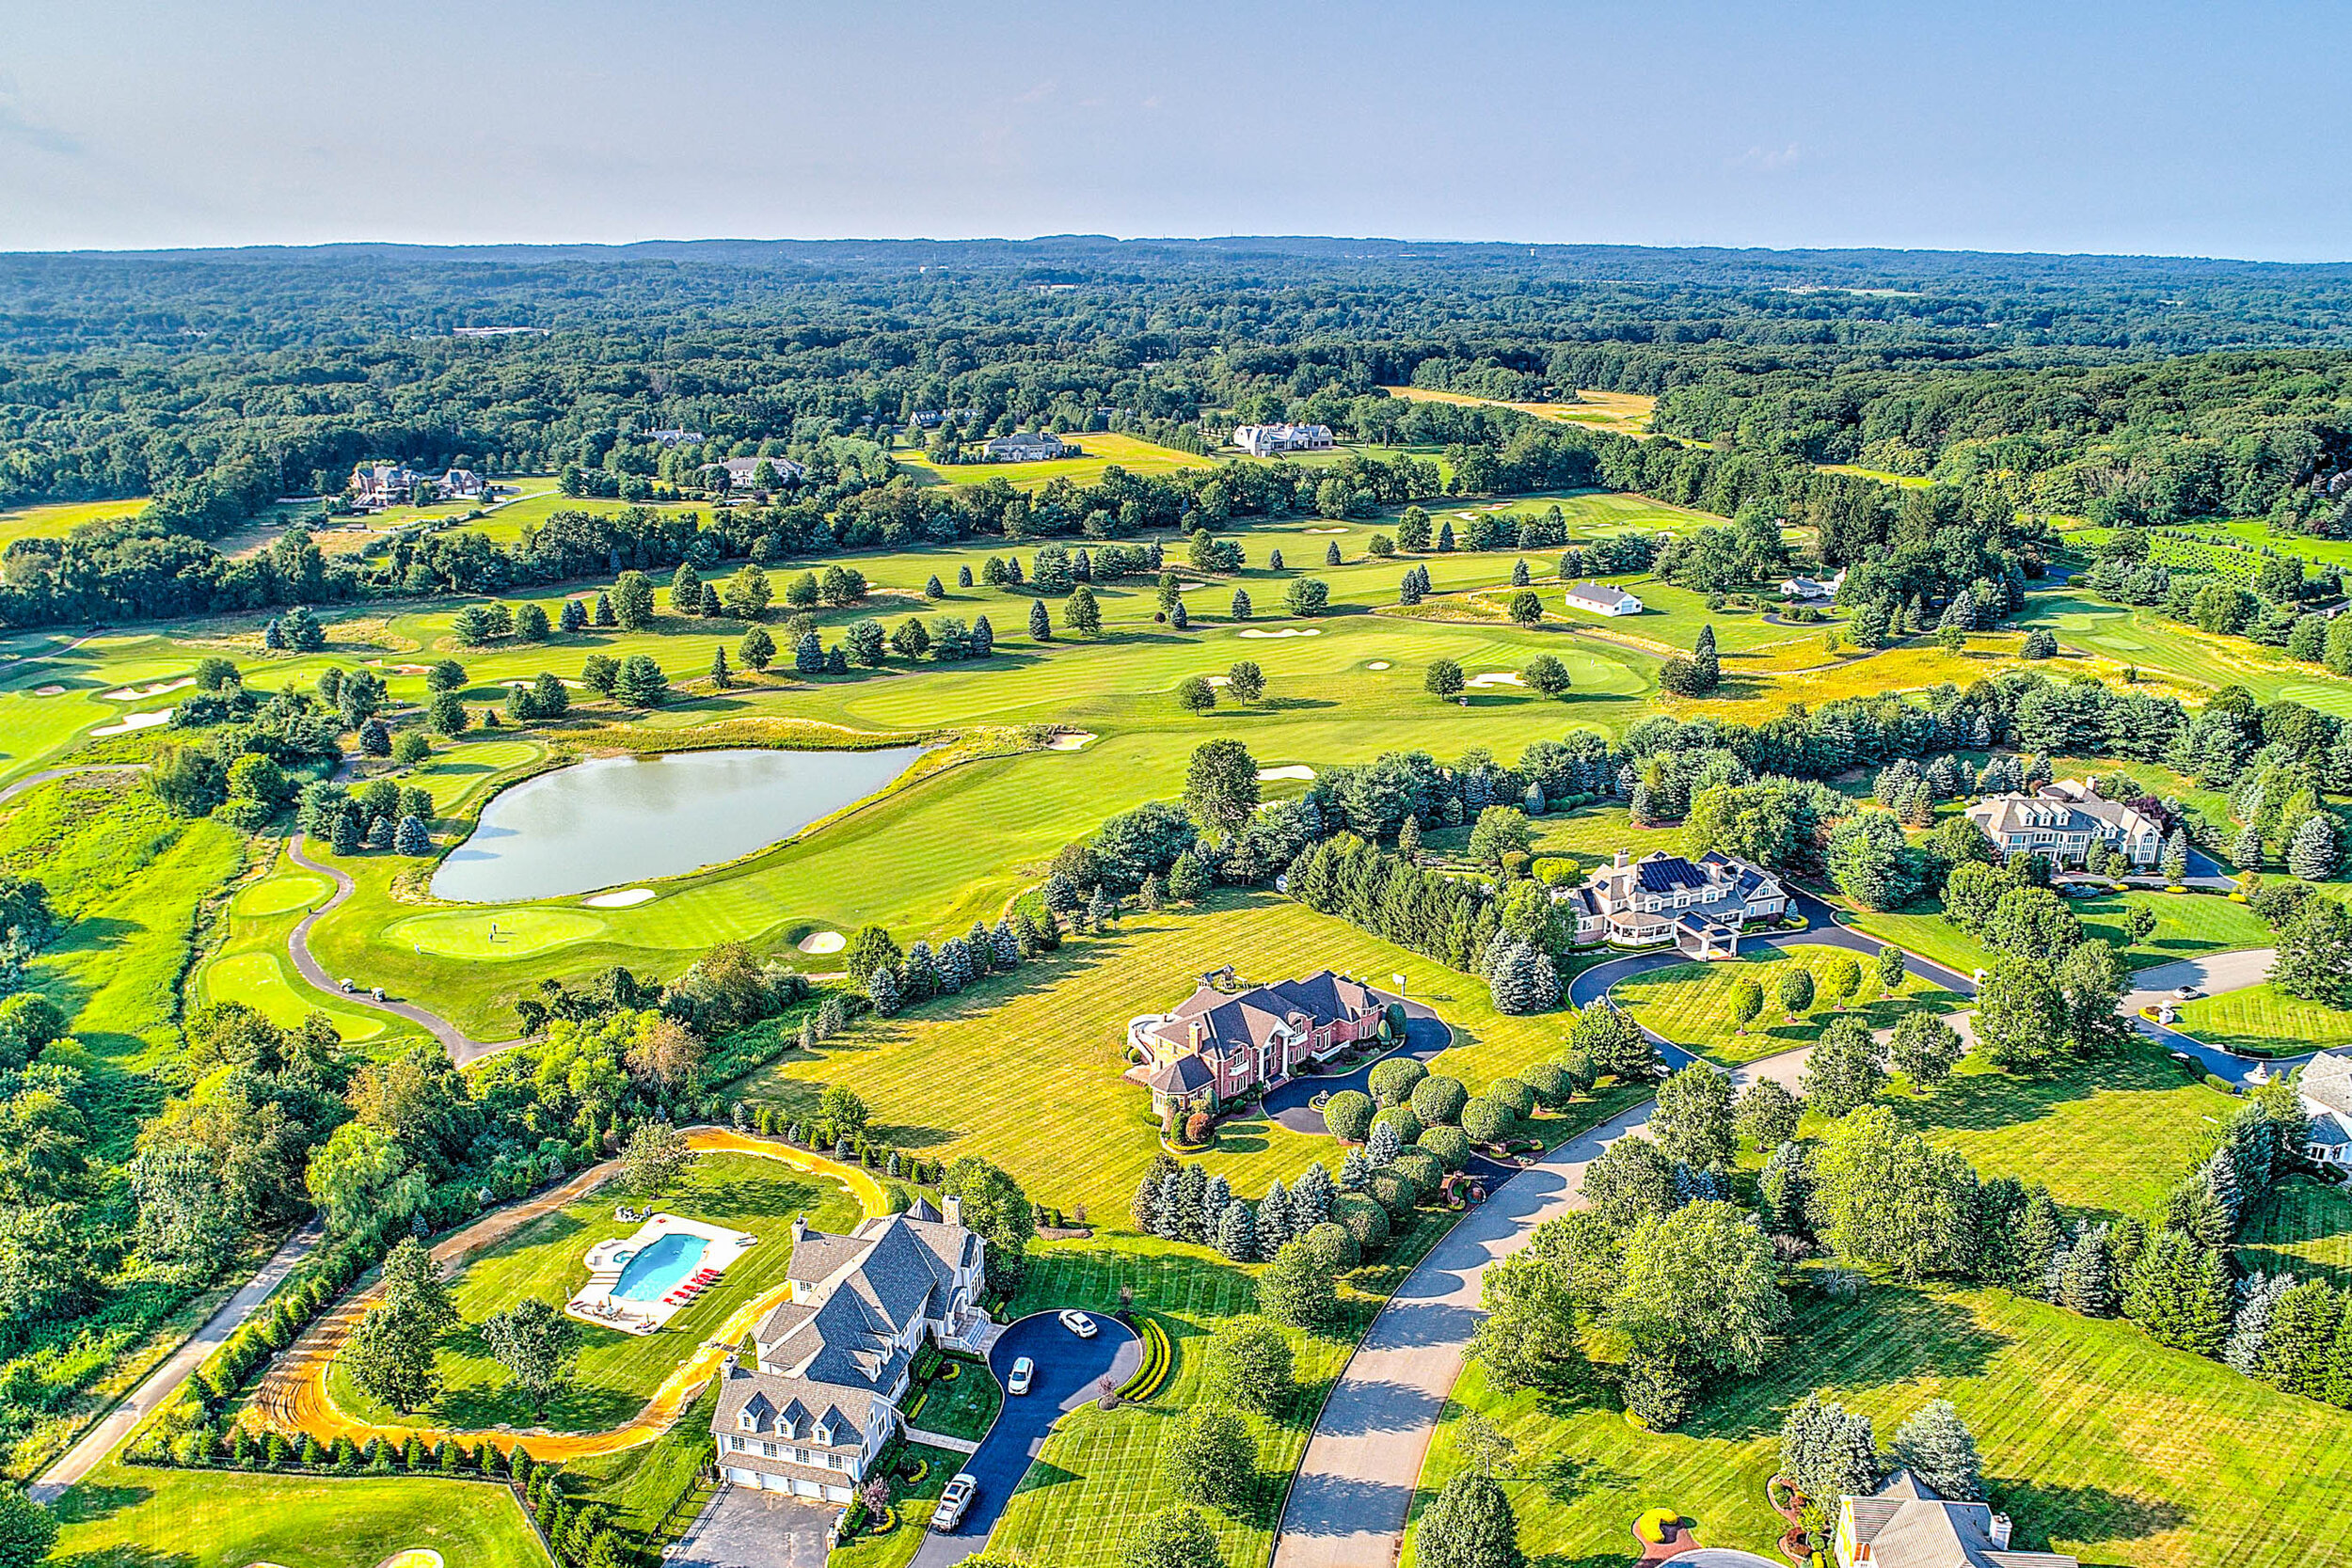 20CountryClubDroneOnline-1.jpg